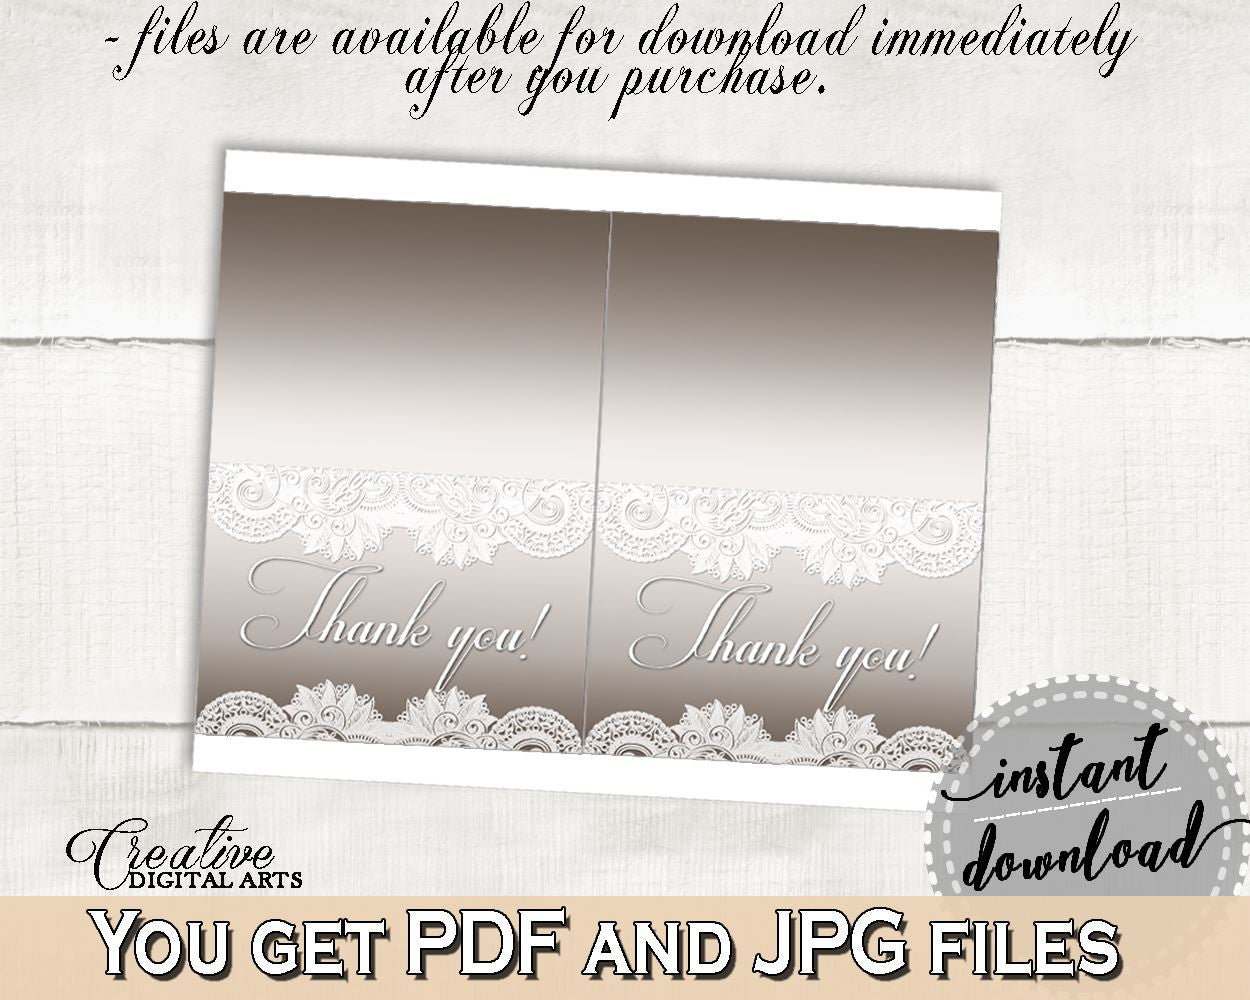 Thank You Card in Traditional Lace Bridal Shower Brown And Silver Theme, thank you note, vintage lace, bridal shower idea, prints - Z2DRE - Digital Product